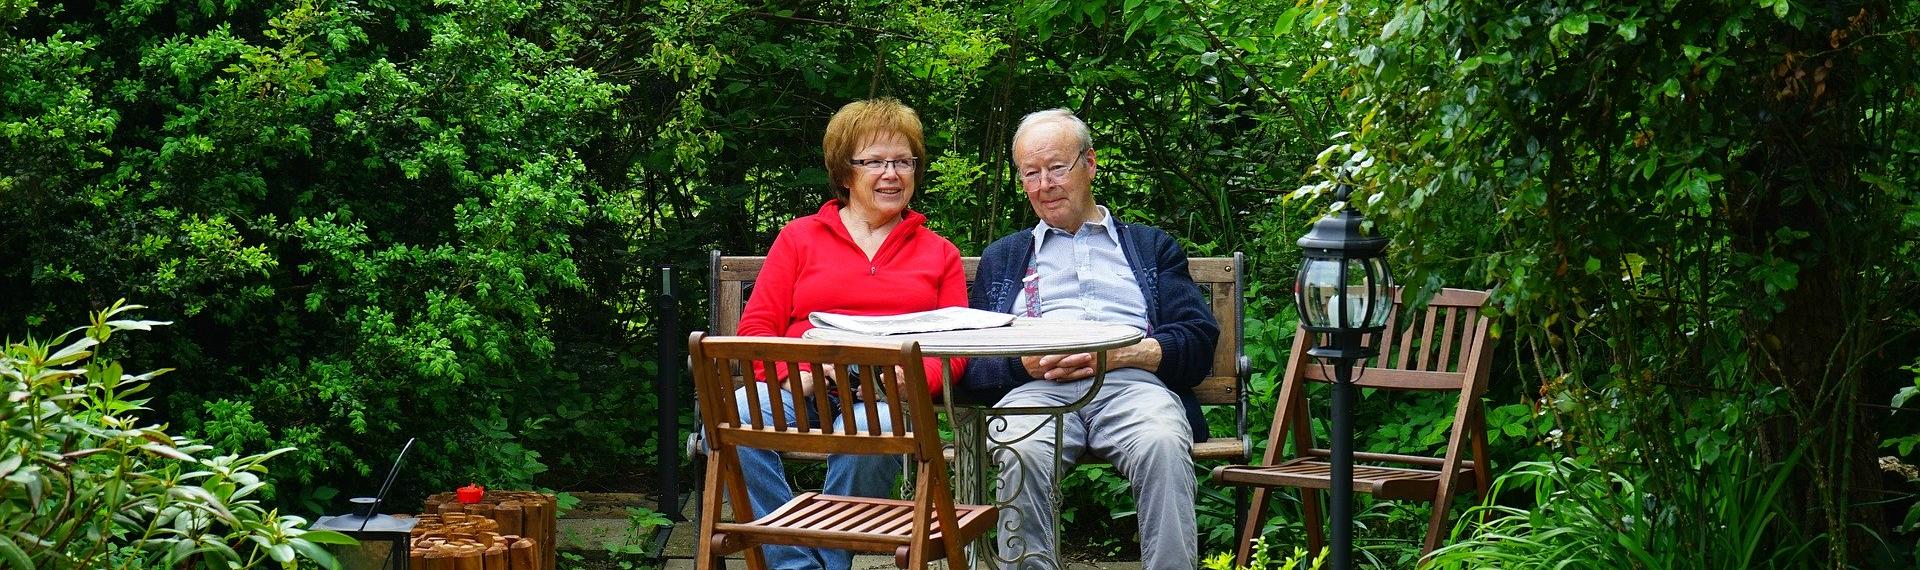 Garden; two people sitting in secluded garden at wooden table and chairs